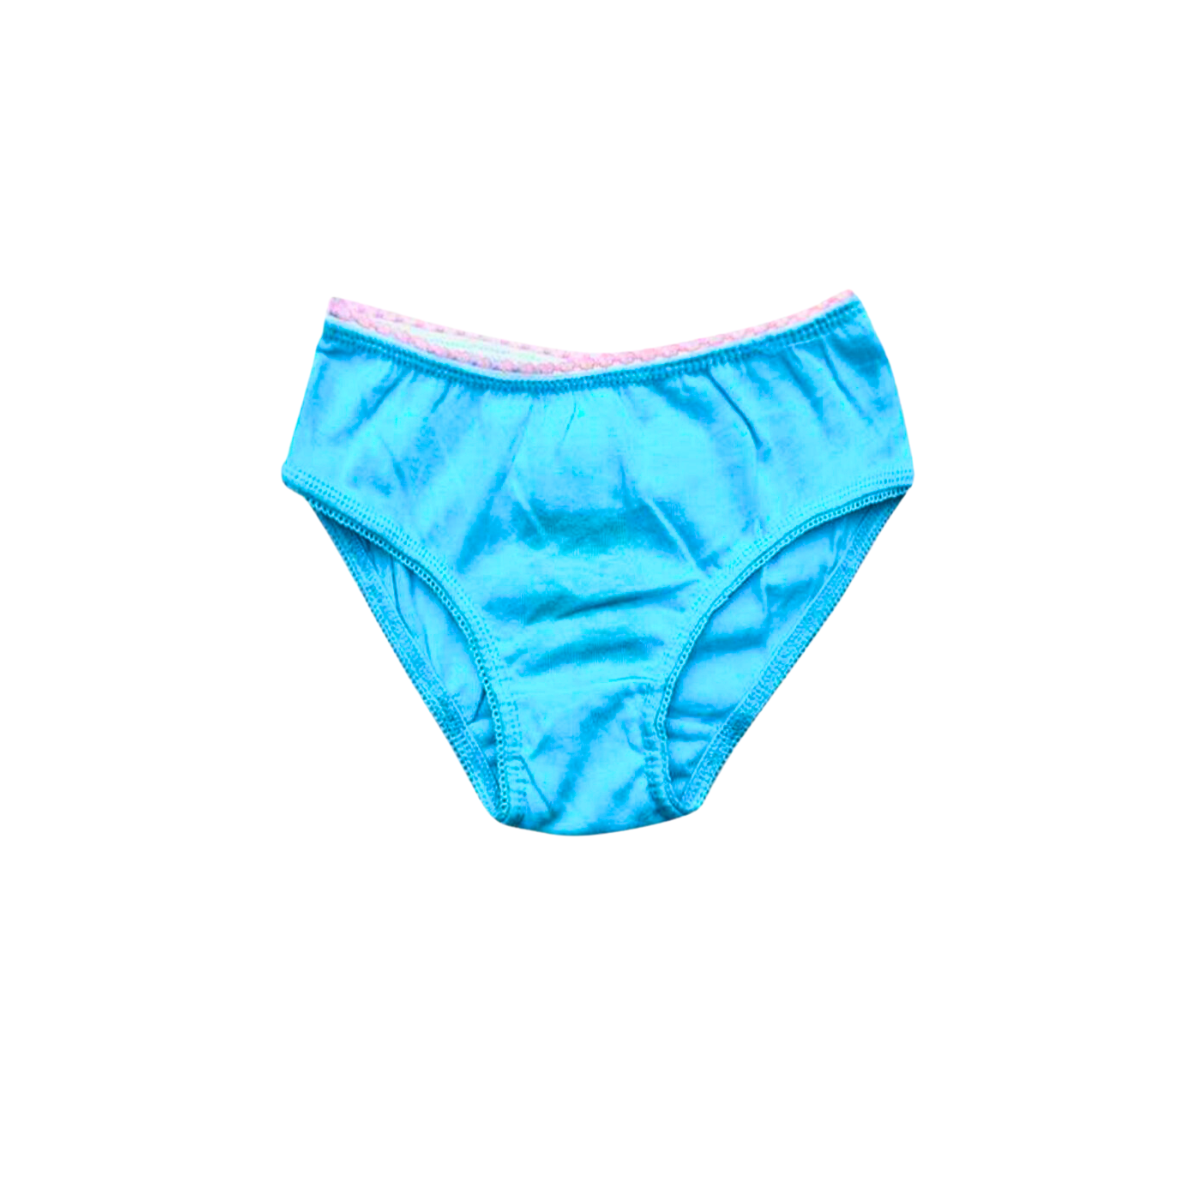 Brand Expo Premium Quality Branded Panty for Girl's Random Colors (Pack of 5)